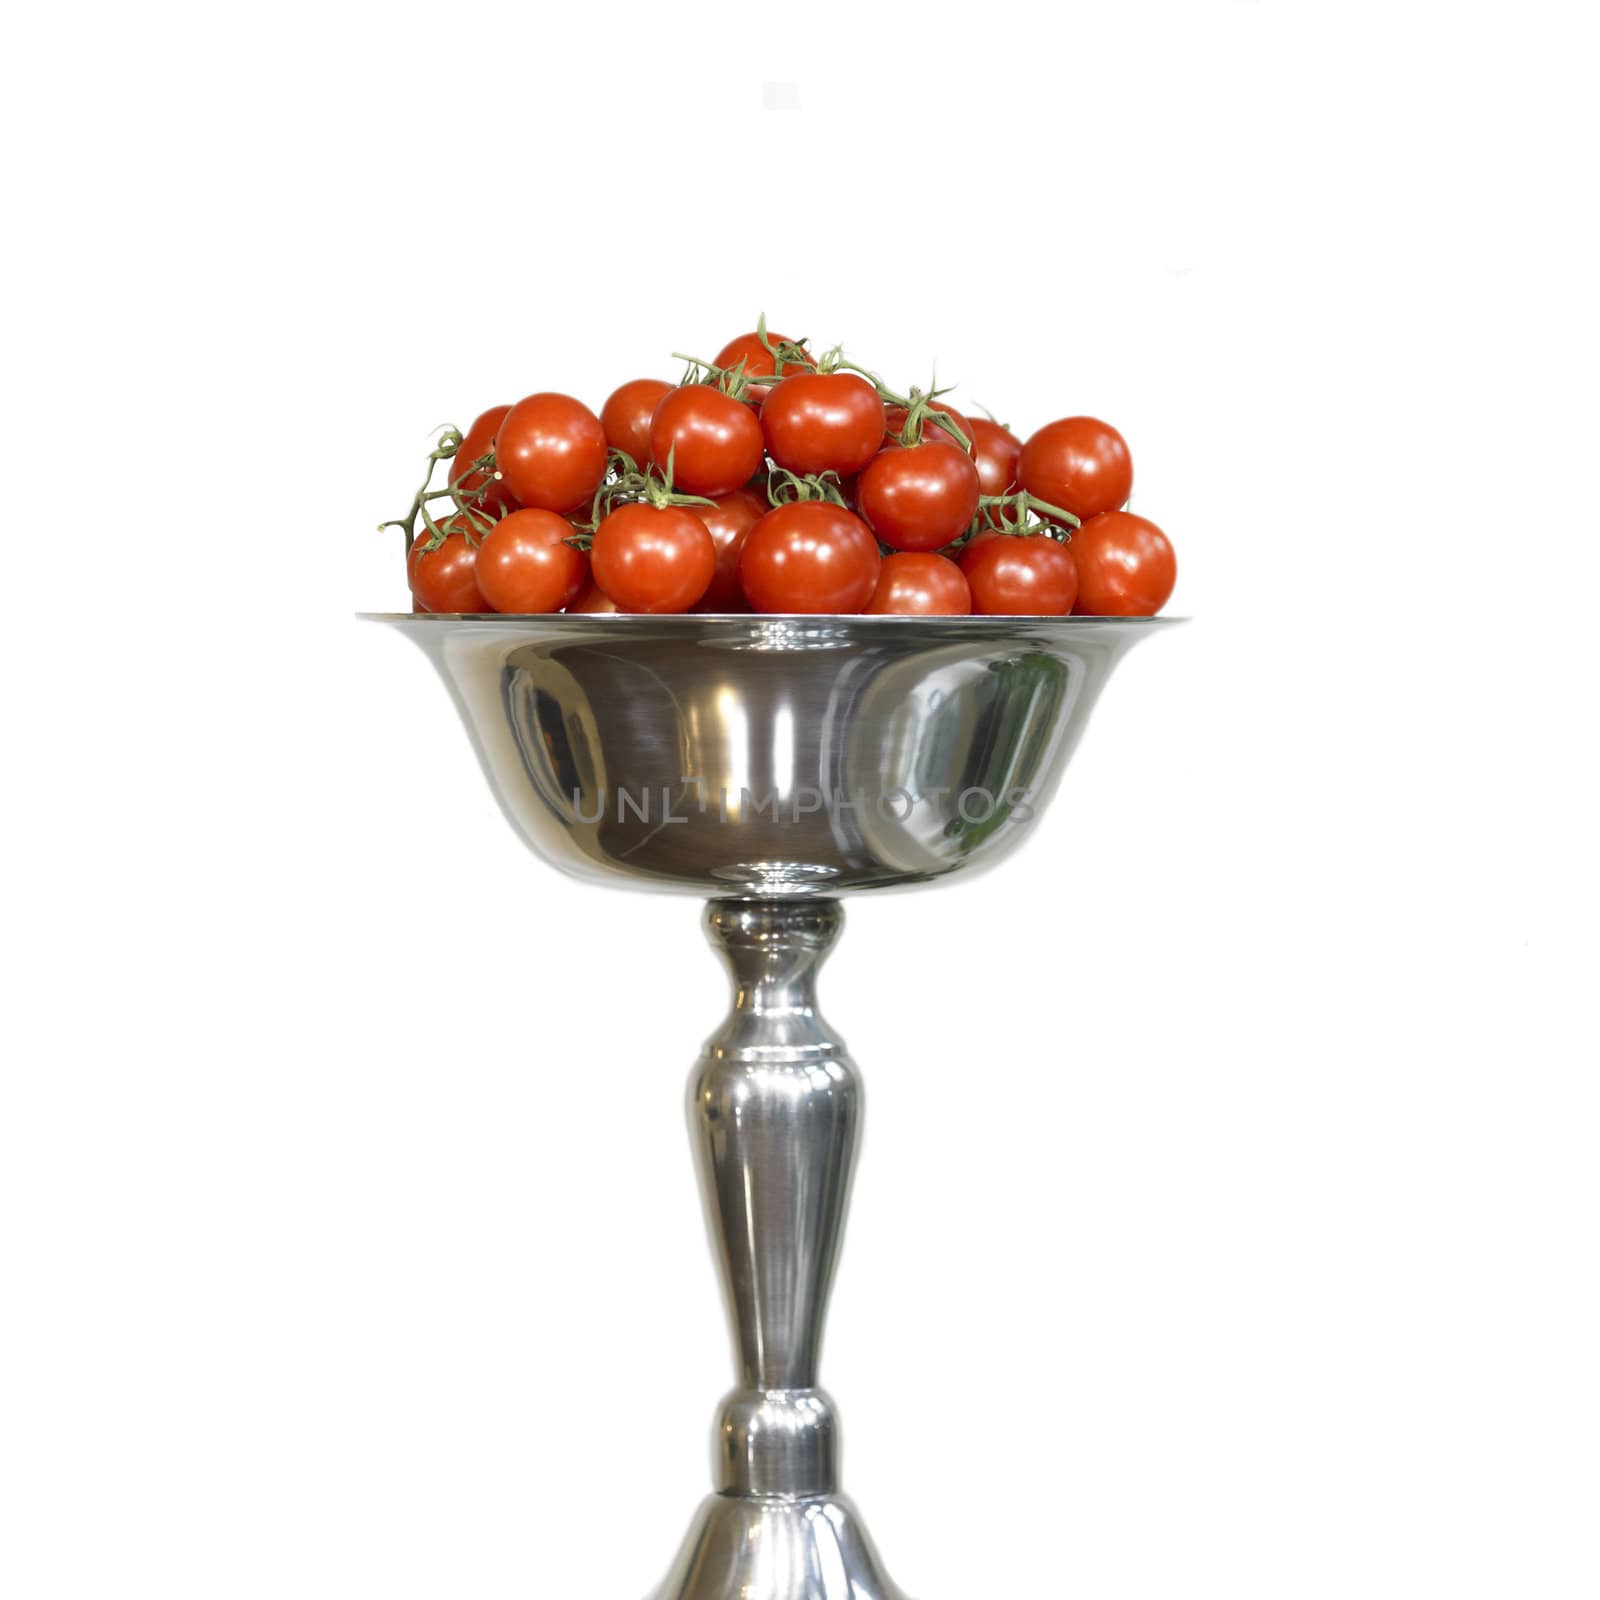 Bowl of tomatoes by mmm